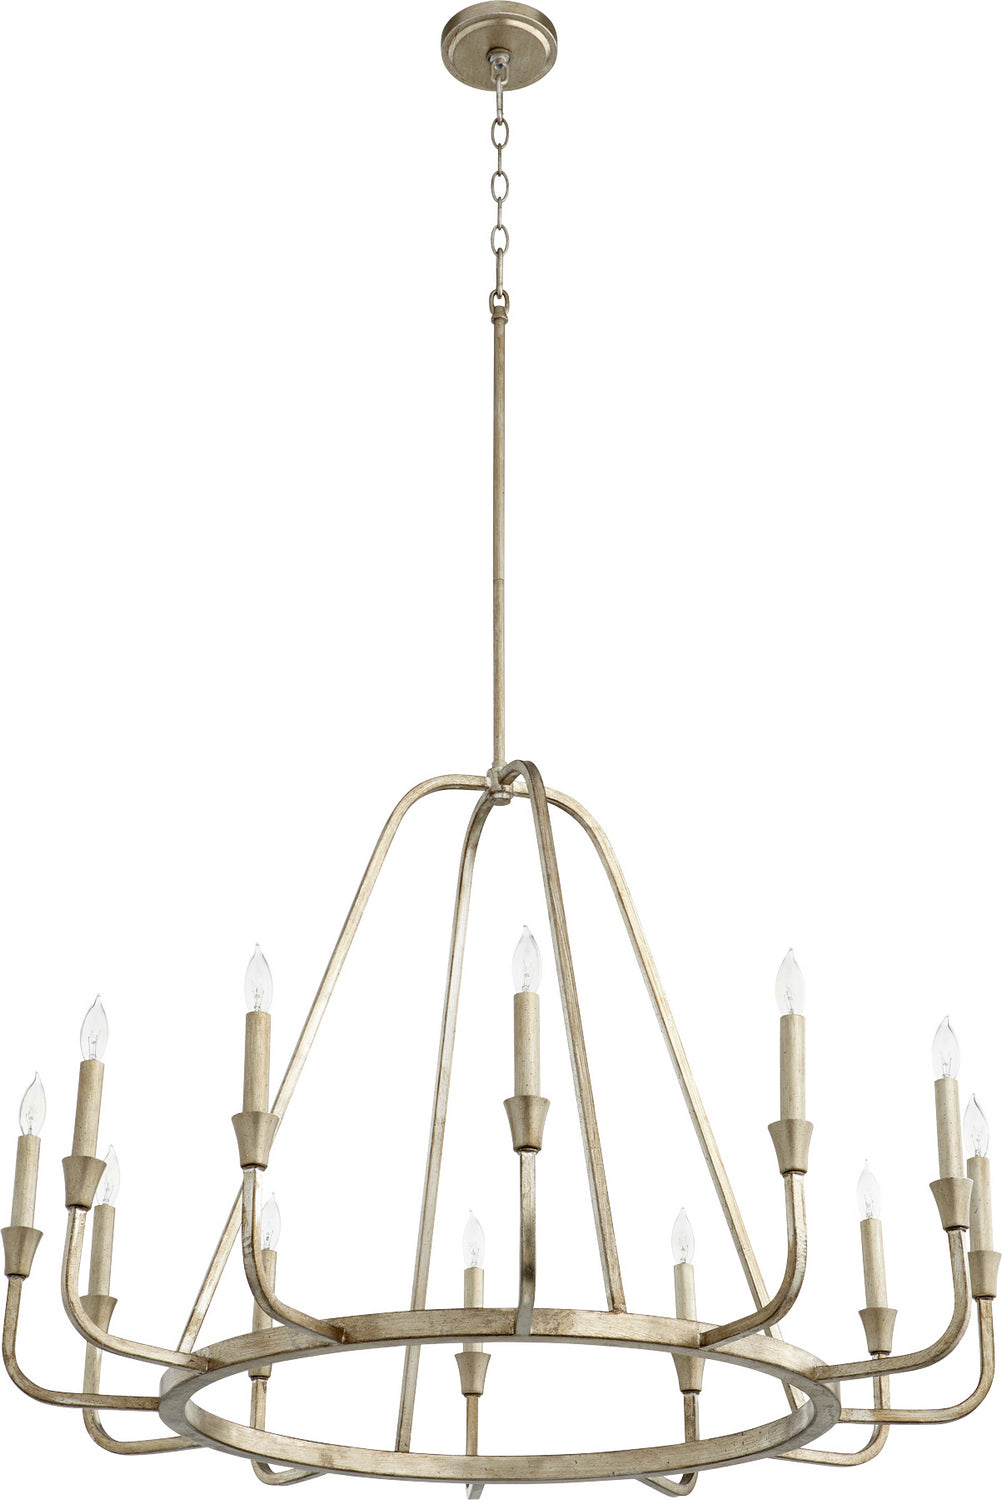 Quorum Marquee 6314-12-60 Chandelier Light - Aged Silver Leaf